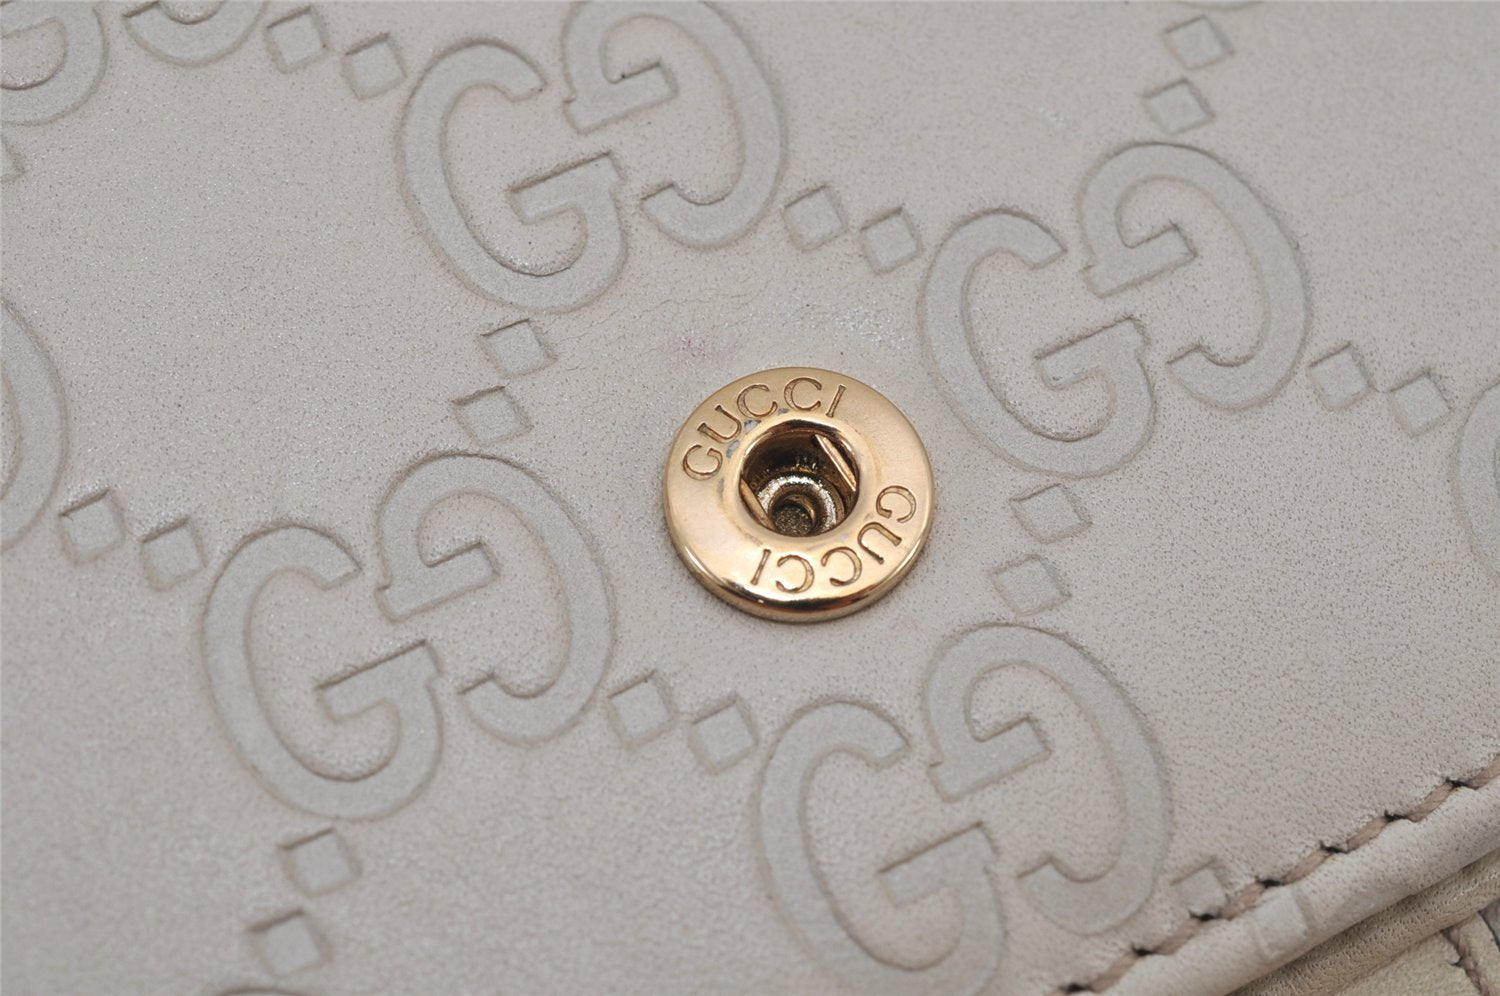 Authentic GUCCI Guccissima GG Leather Long Wallet Purse 212089 White 8194J